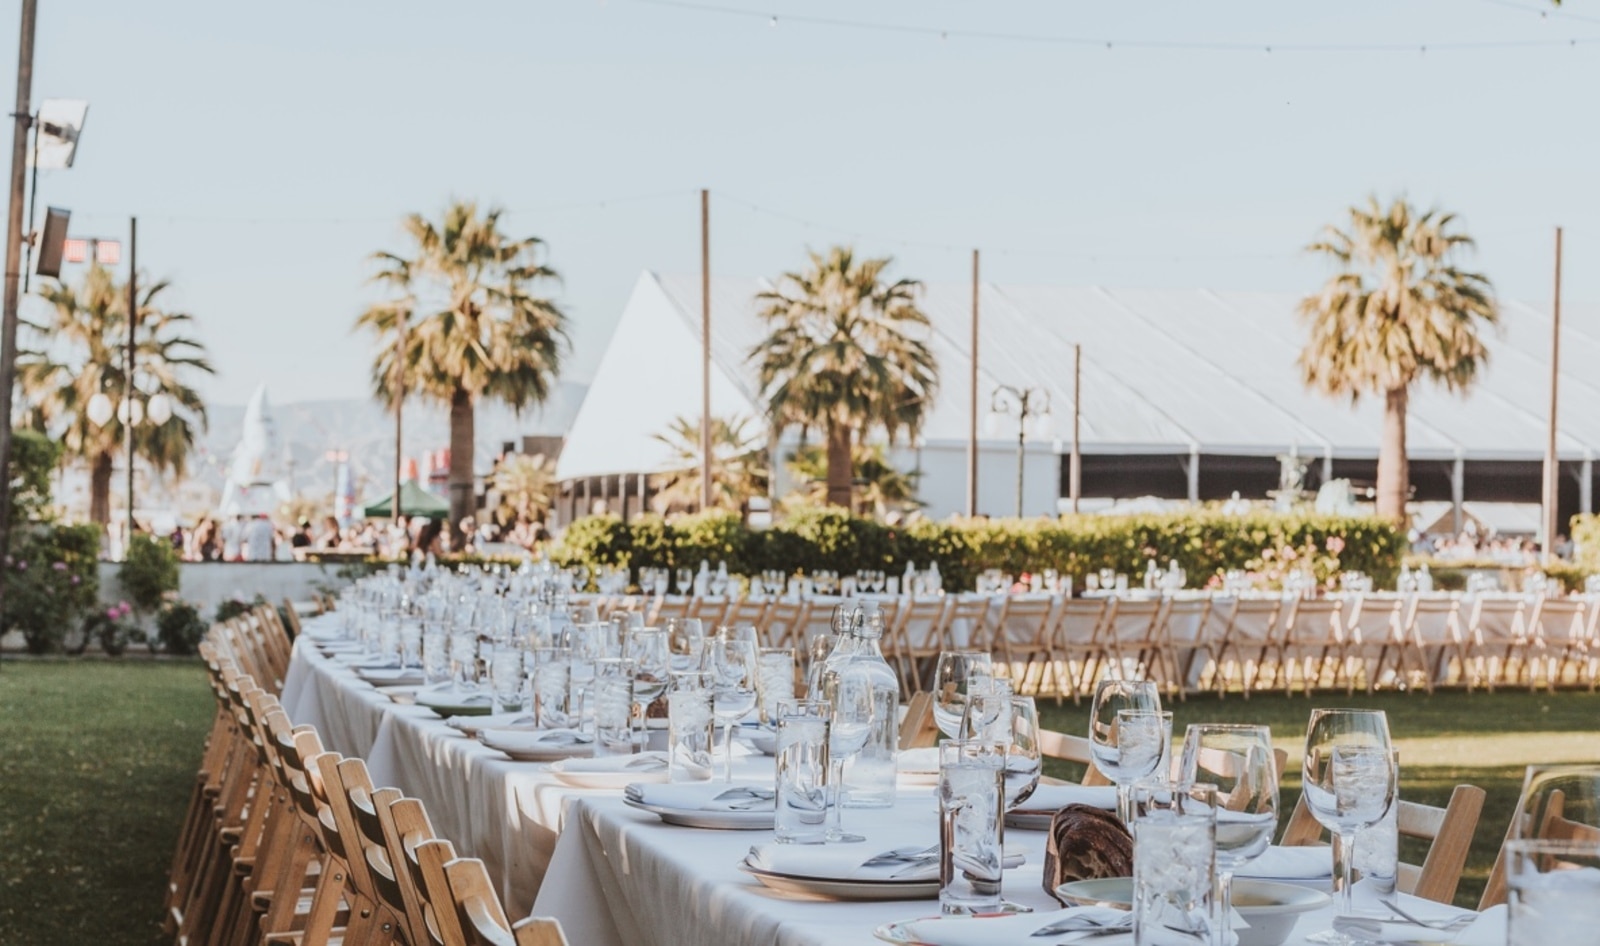 Coachella Hosts Its First Multi-Course Vegan Dinner With Outstanding in the Field